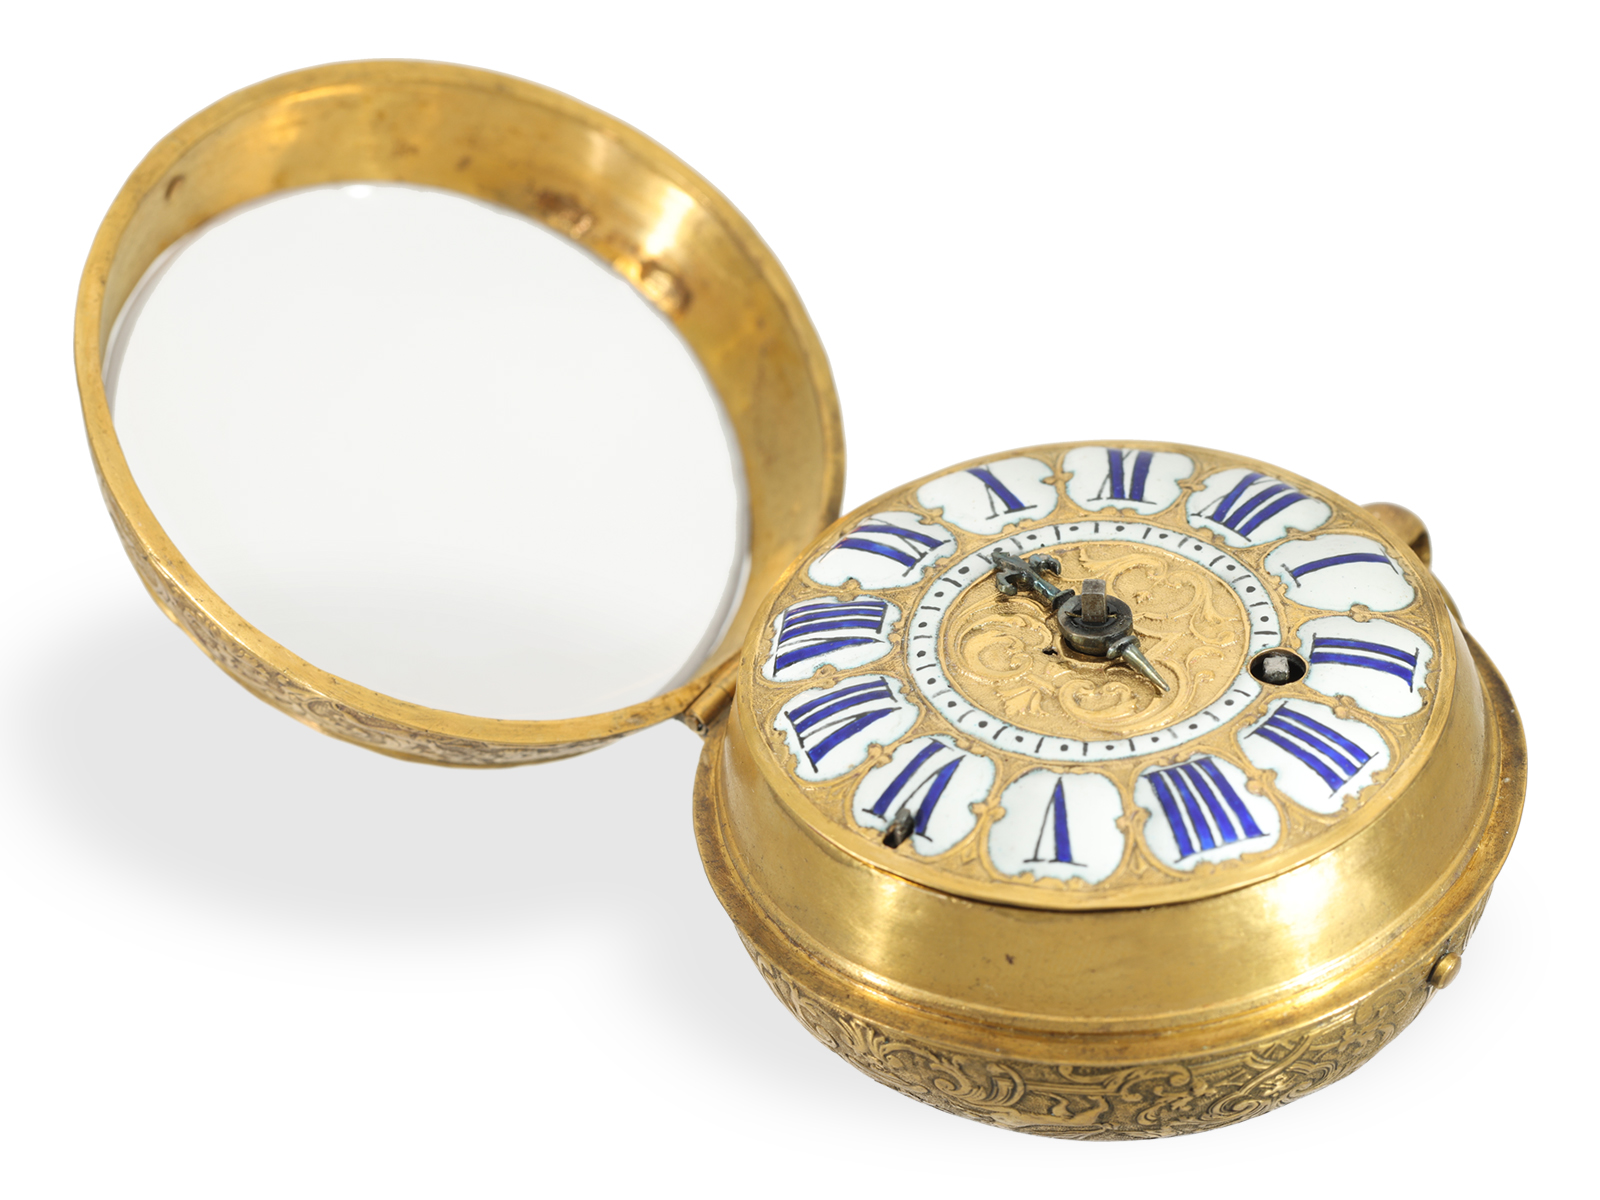 Pocket watch: very early, single-hand Geneva oignon with gold dial, Lazare Arlaud ca. 1690 - Image 3 of 6